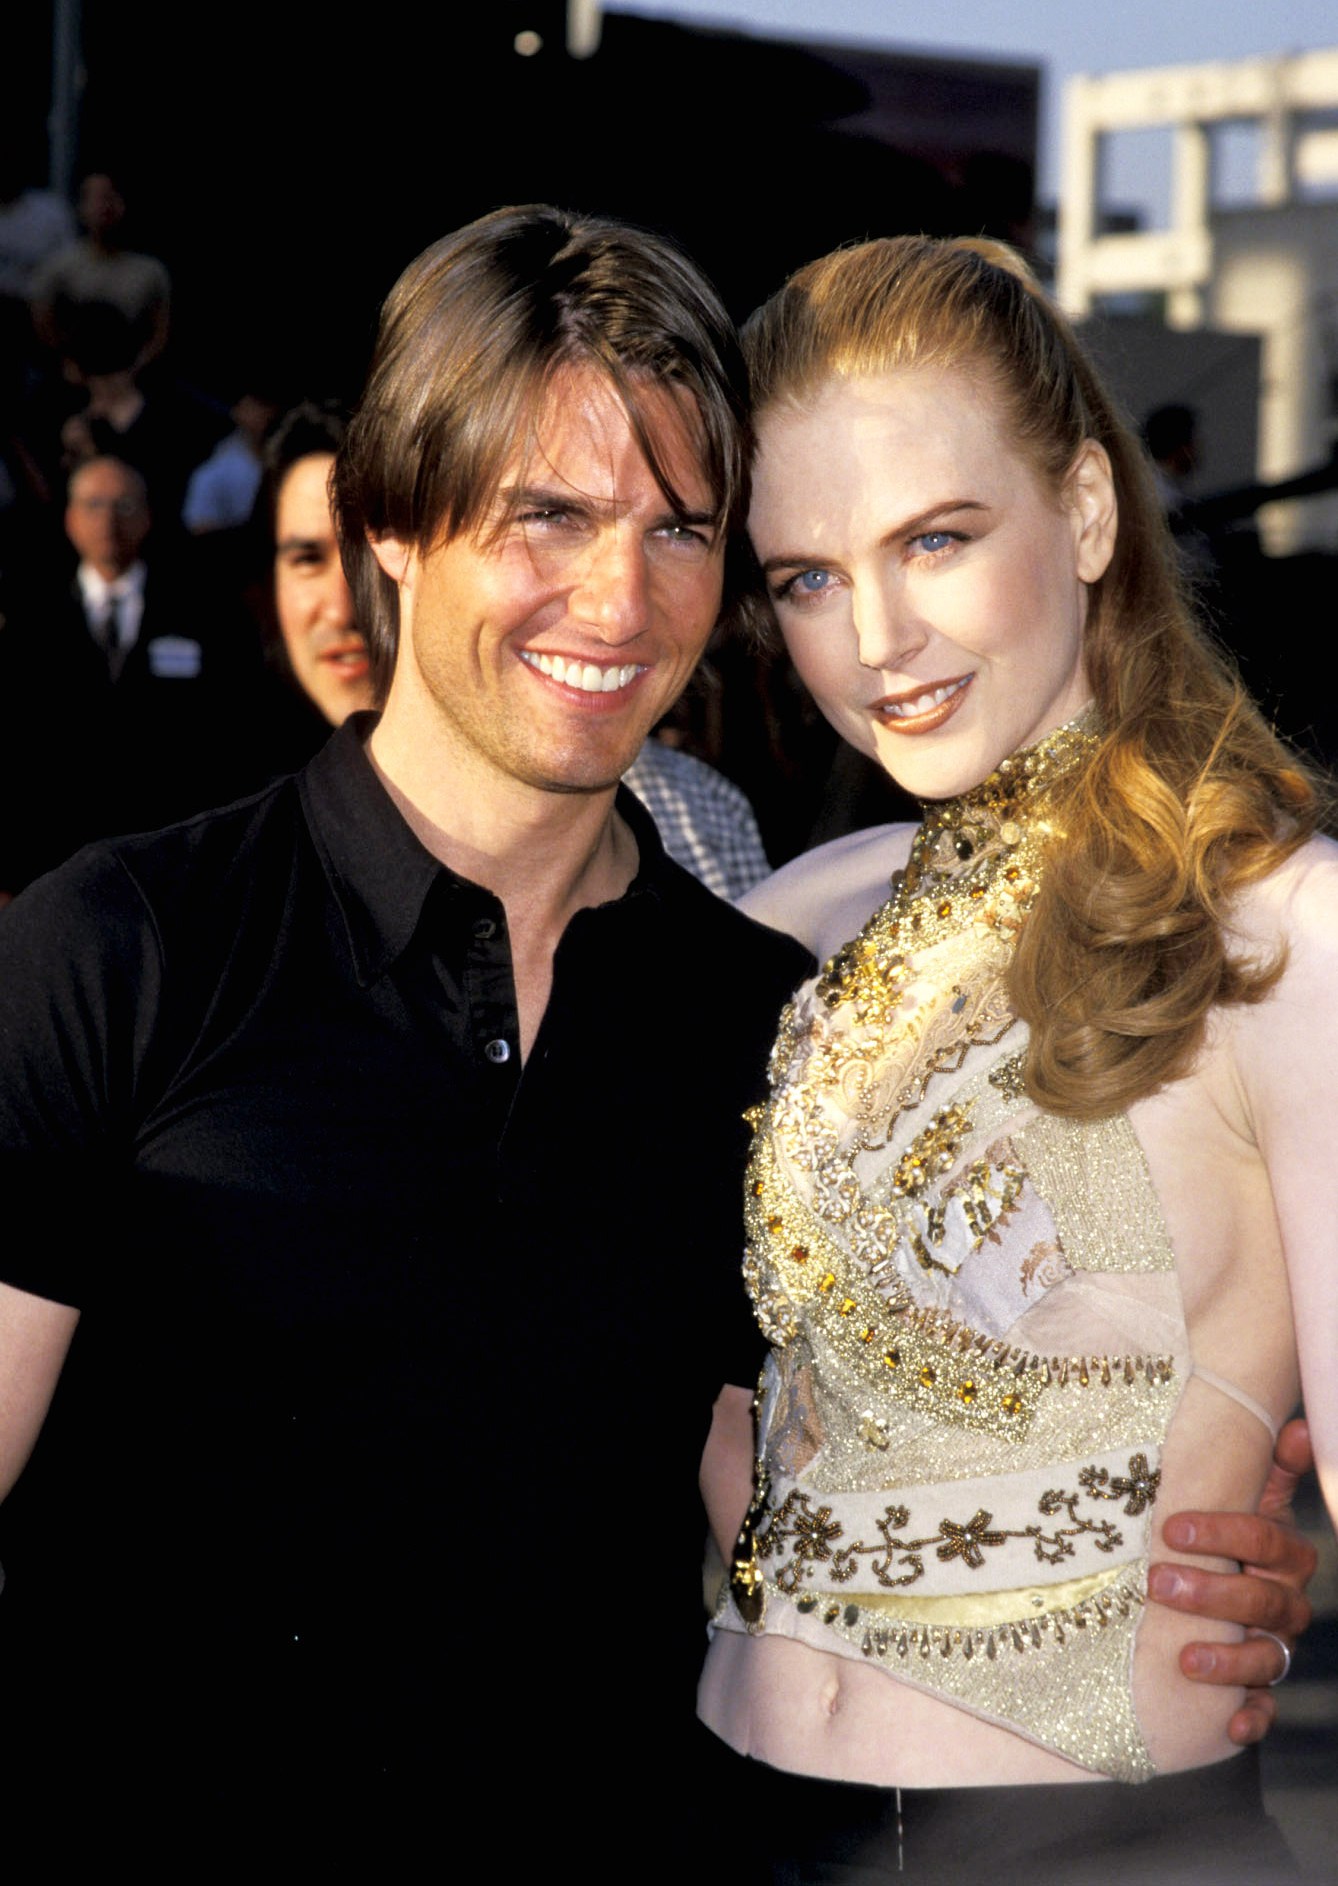 is tom cruise with anyone now